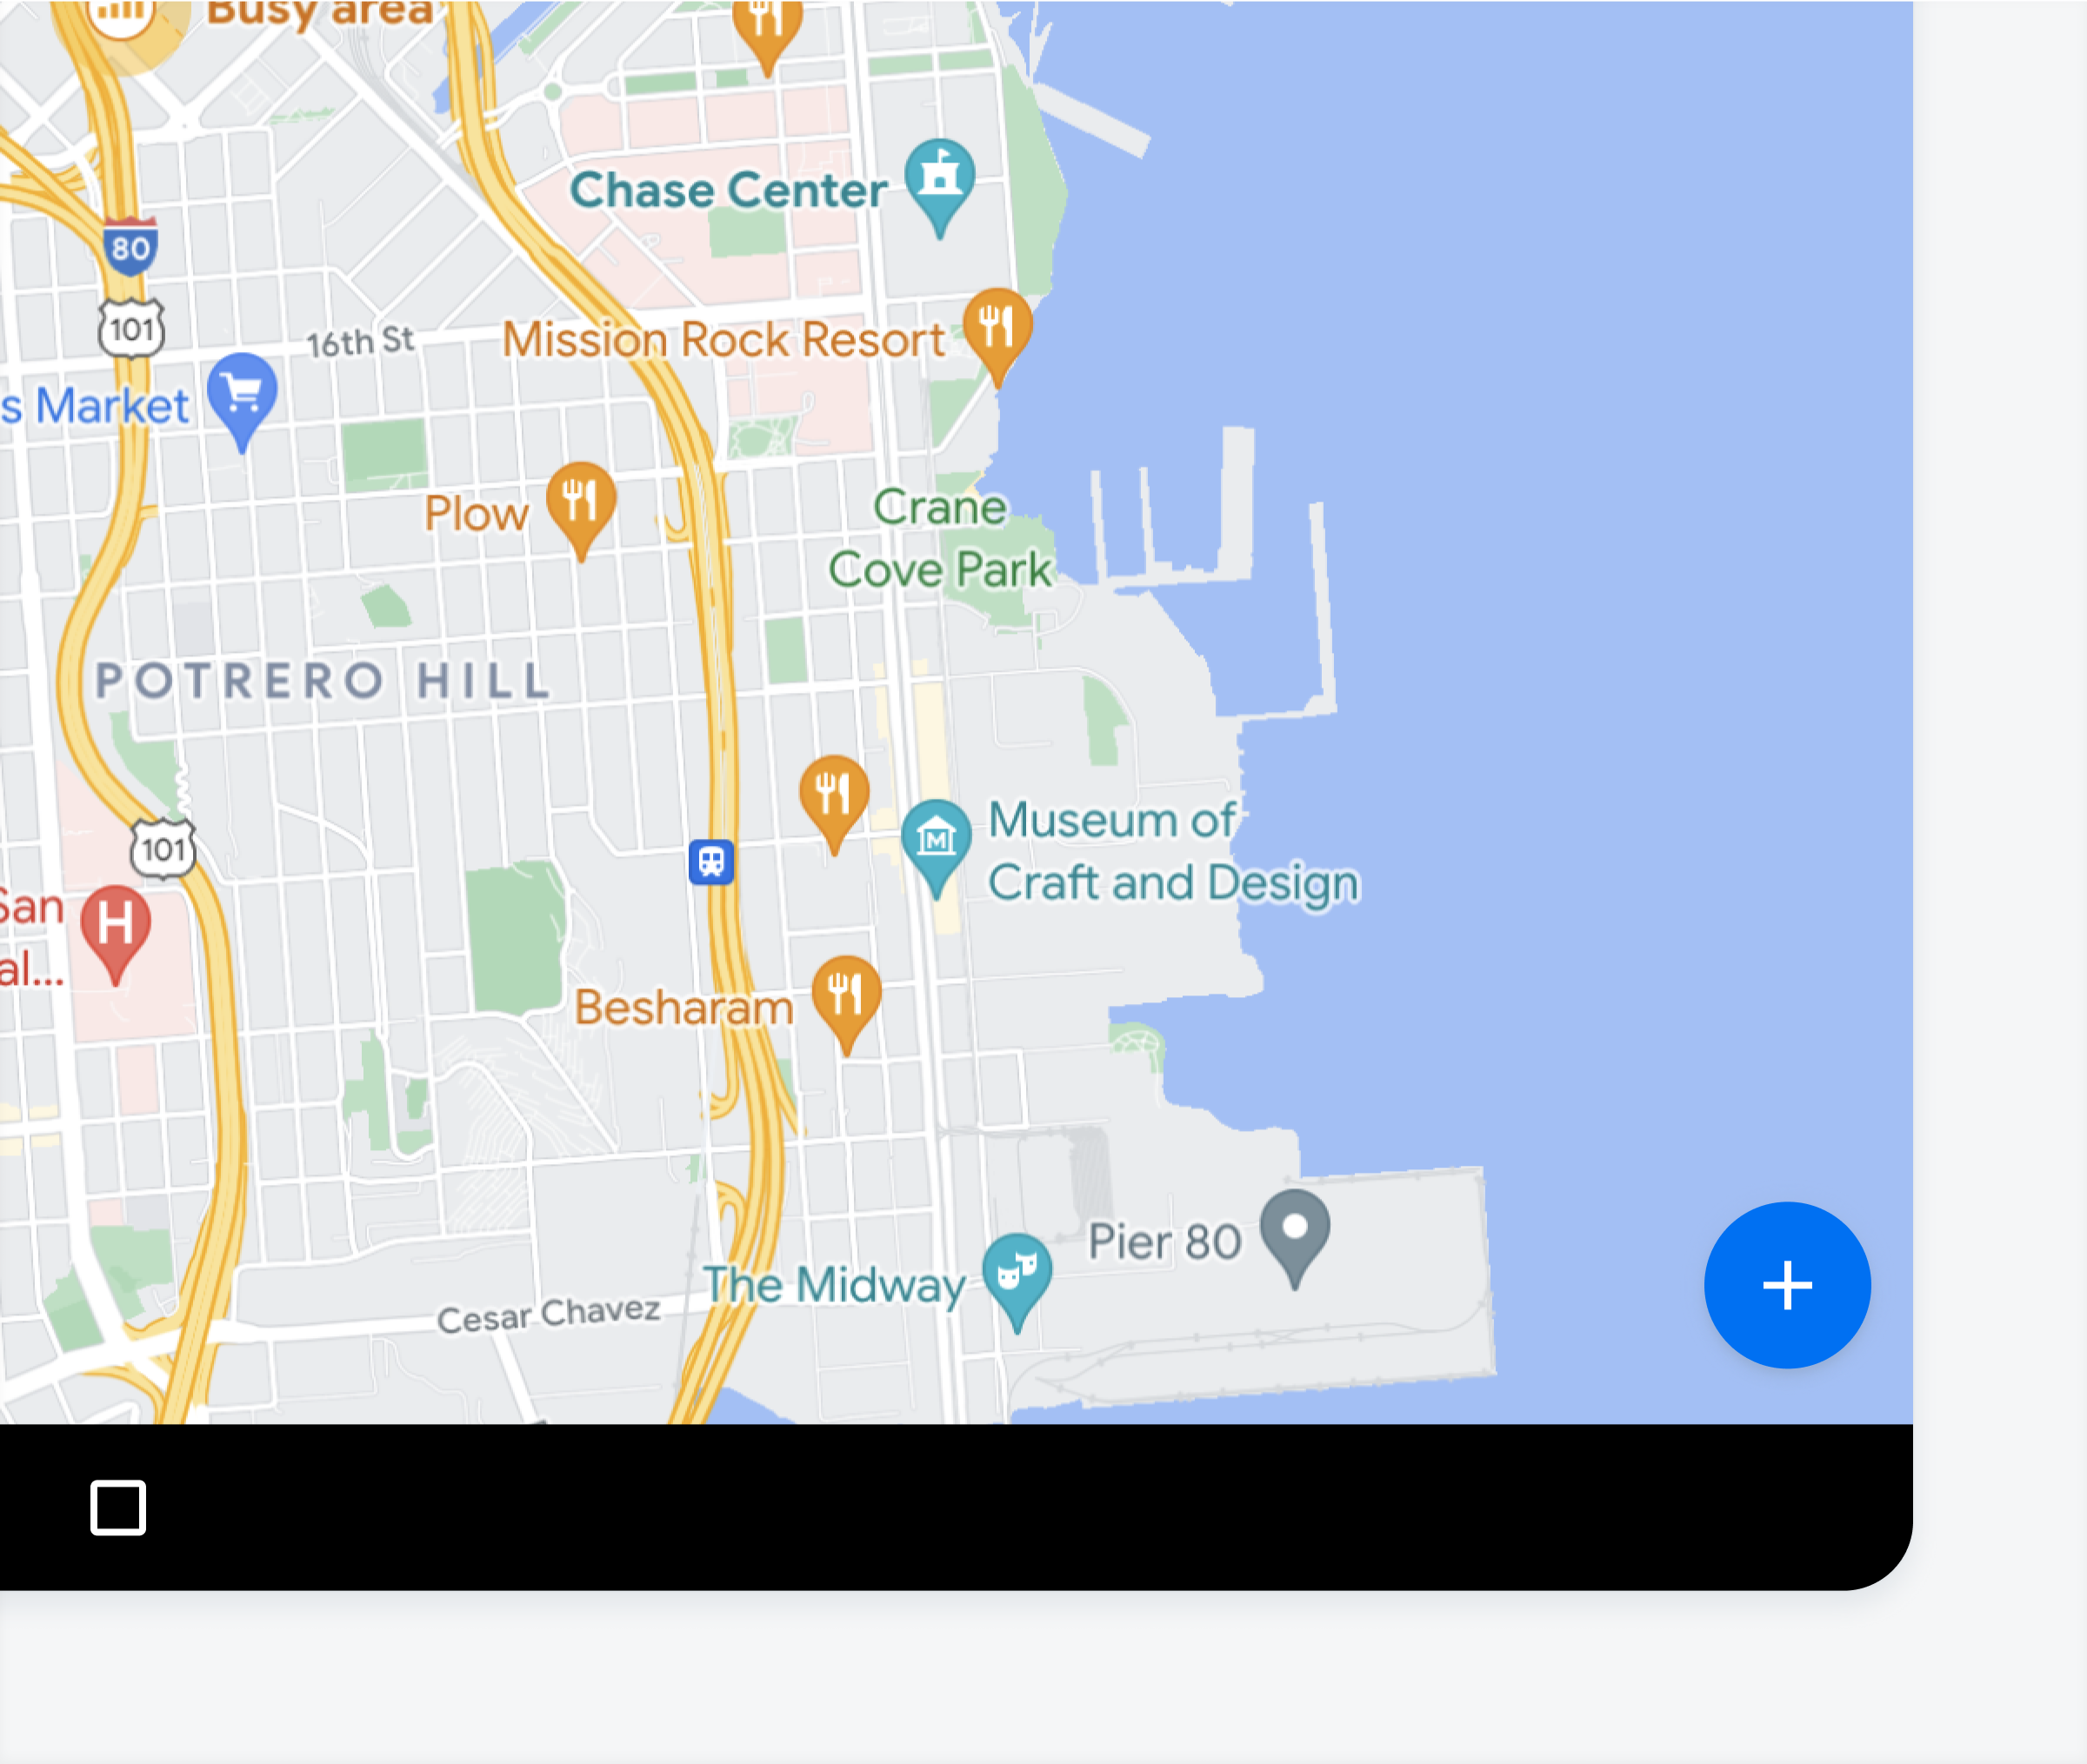 Floating action button on bottom right of map view 